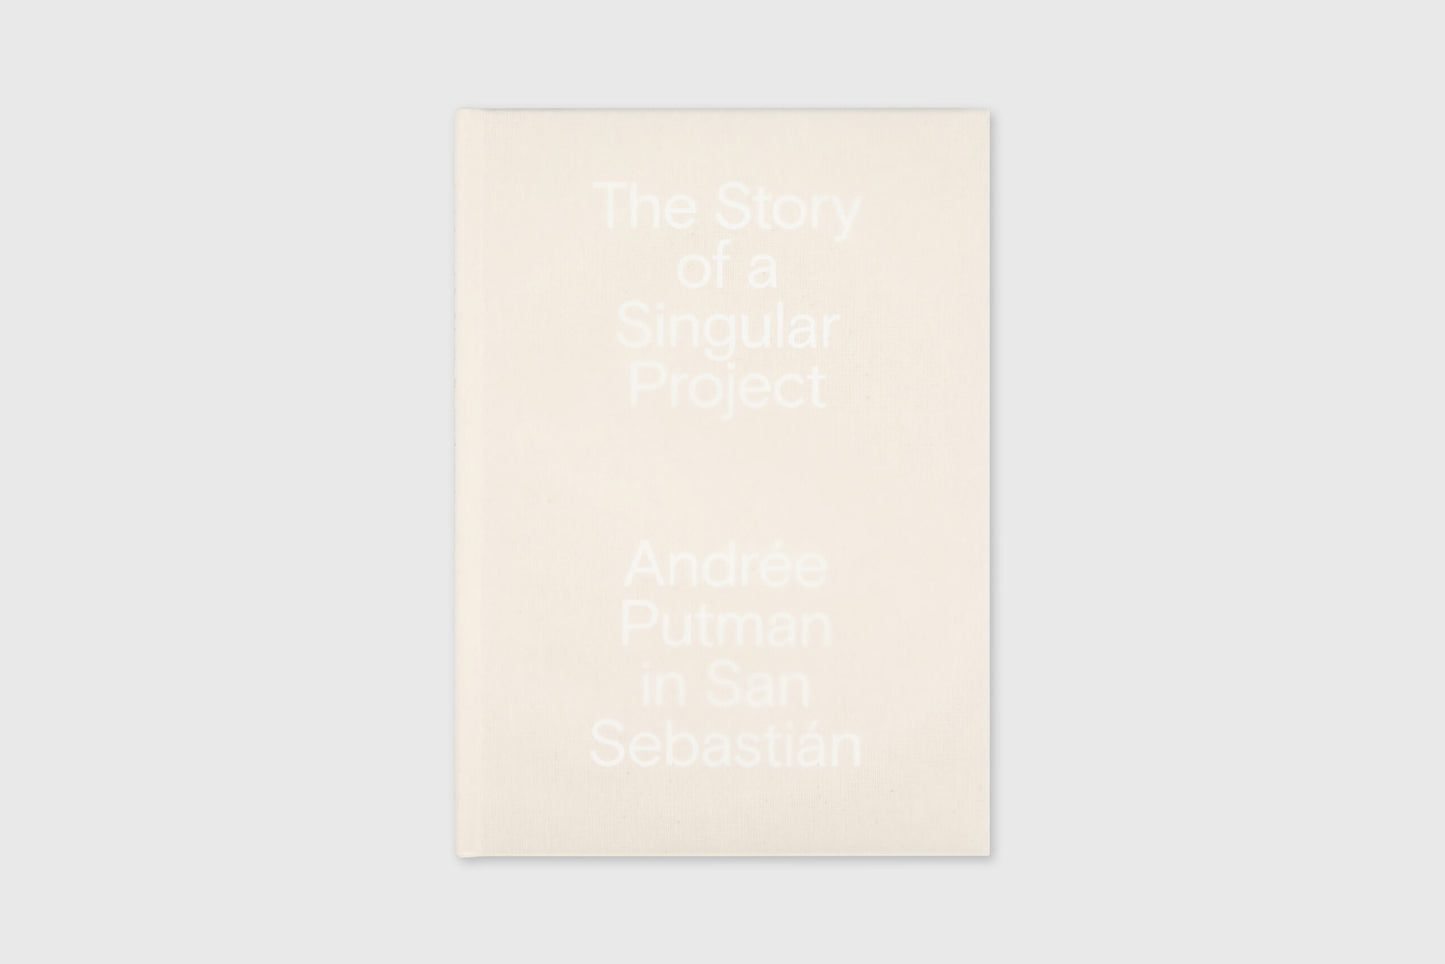 Andree Putman In San Sebastian - The Story Of A Singular Project